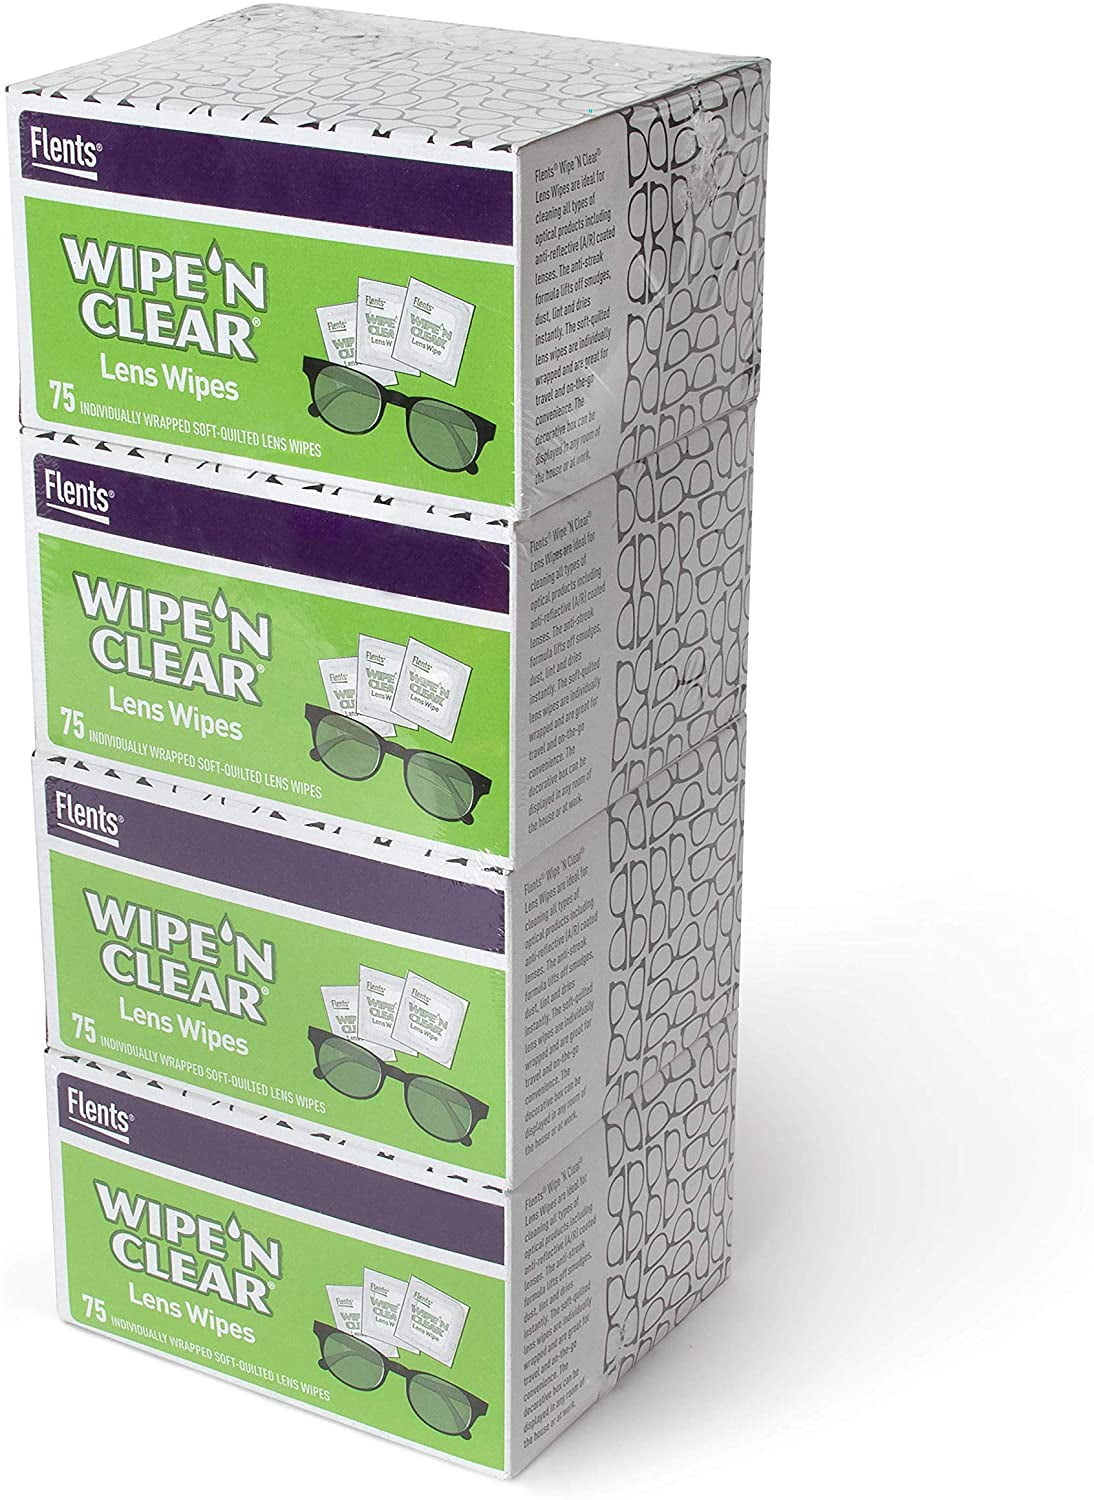 Wipe'N Clear Lens Wipes by Flents, 100 Lens Cleaning Wipes, Anti-Streak &  Fast Drying, 5x6,100 Count